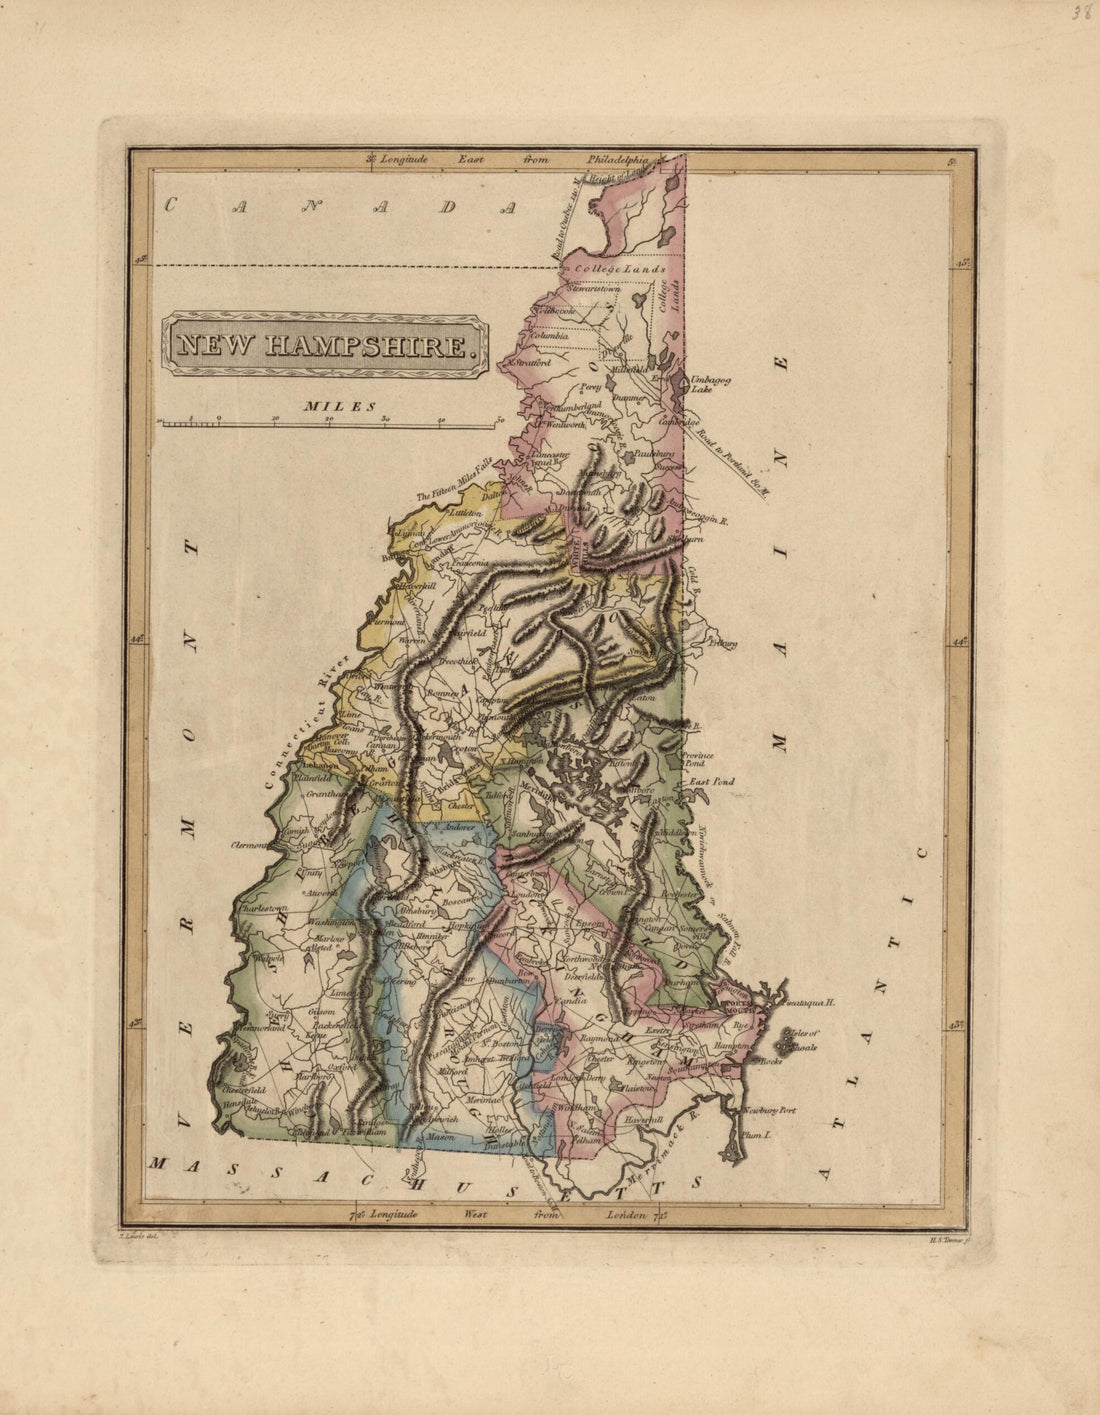 This old map of New Hampshire from a New and Elegant General Atlas, Containing Maps of Each of the United States  from 1817 was created by Henry Schenck Tanner in 1817